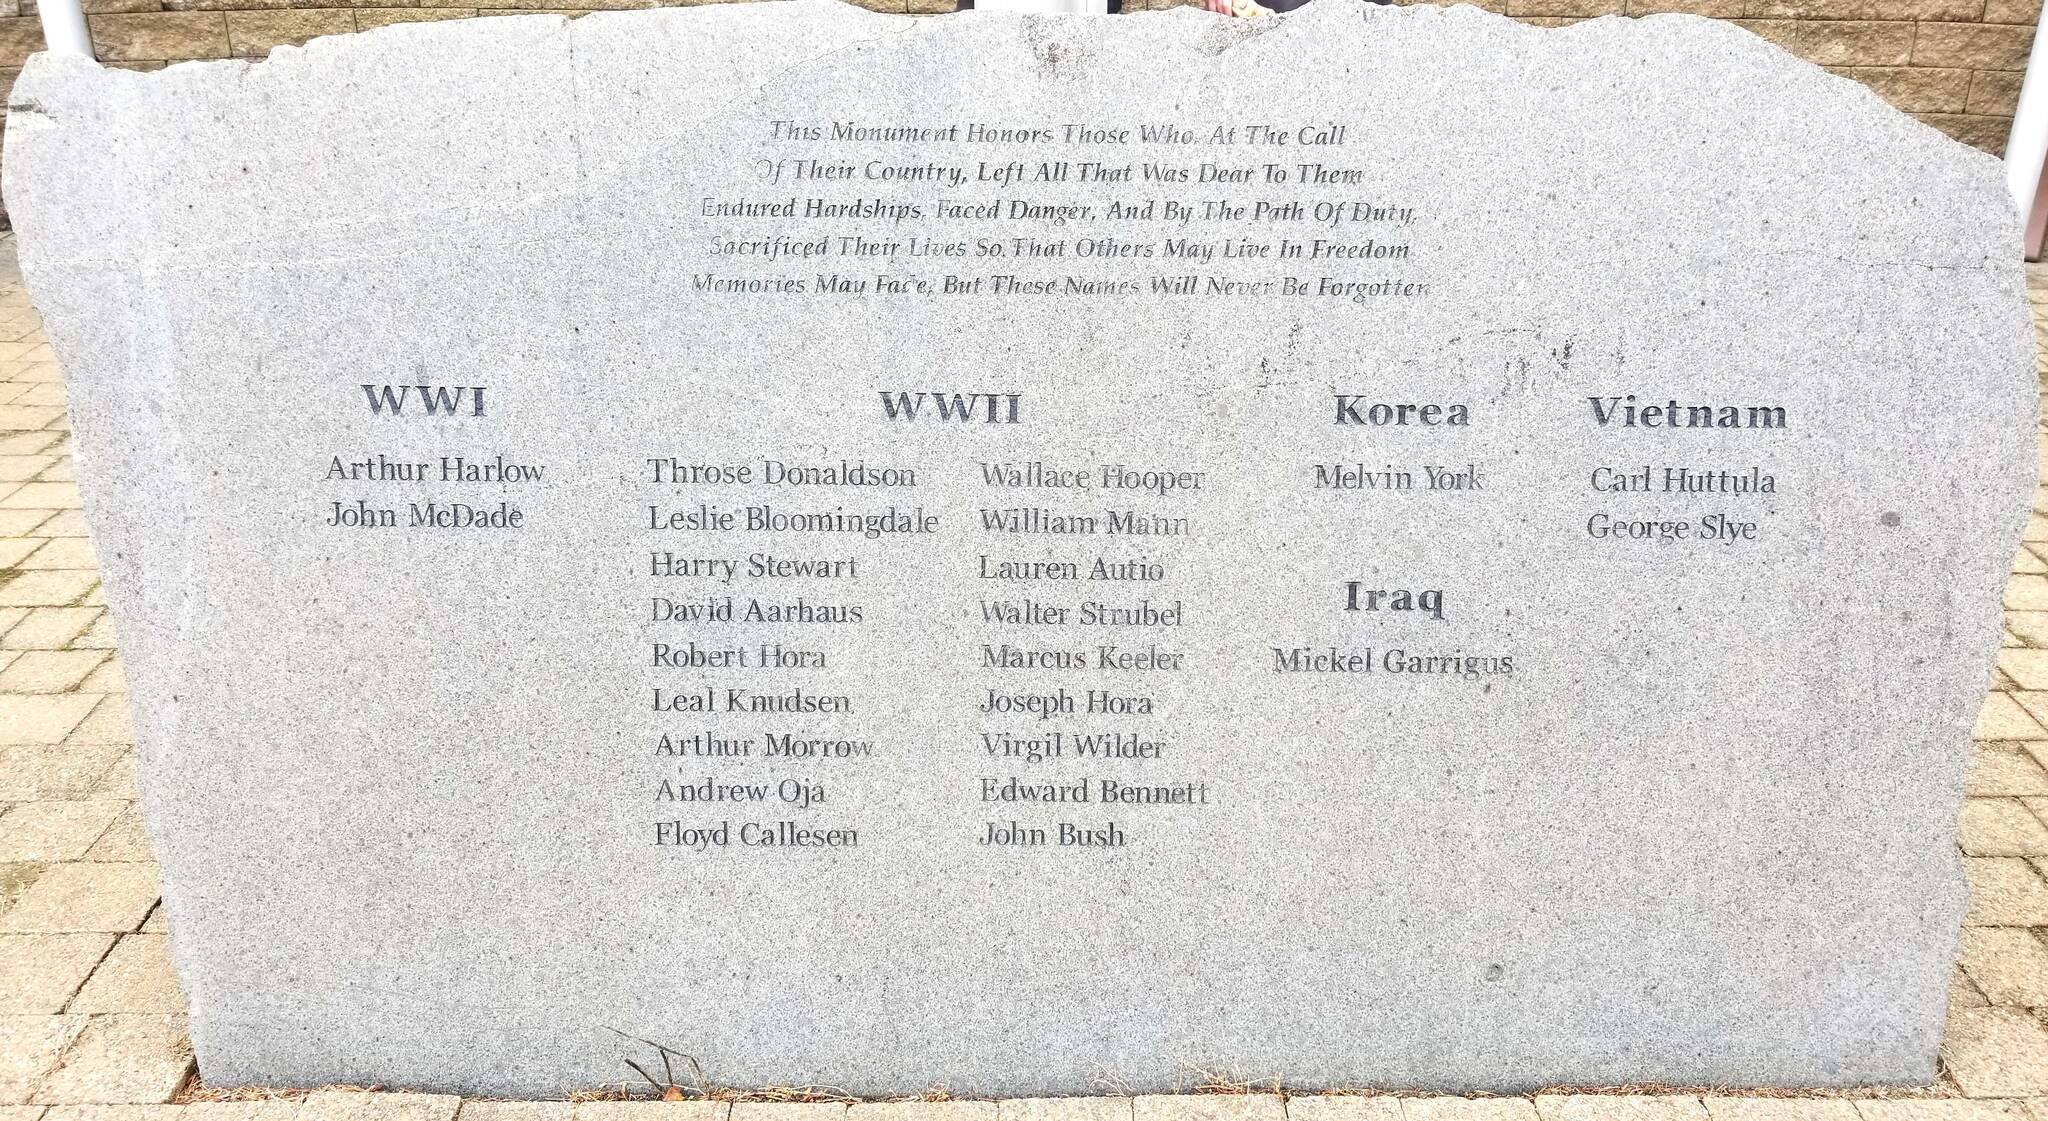 A plaque to pay tribute to all local soldiers killed in combat across multiple wars could be seen on display during the Veterans Day celebration and parade at the Elma Veteran’s Memorial Park, in Elma.